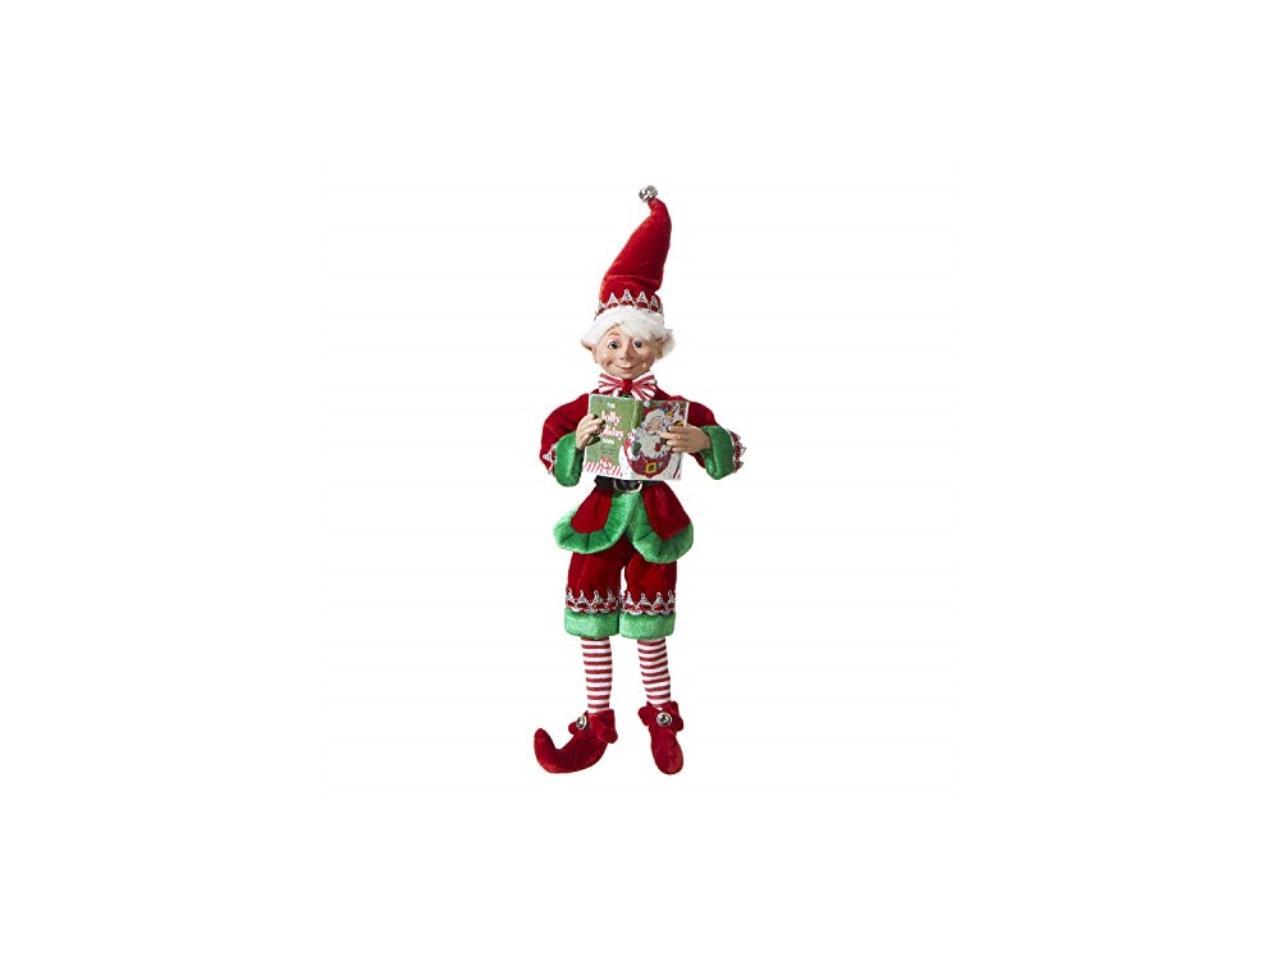 Red and Green Velvet Outfit with Santa Book 30 Tall 2019 Reindeer Games Holiday Collection RAZ Imports Posable Christmas Elf